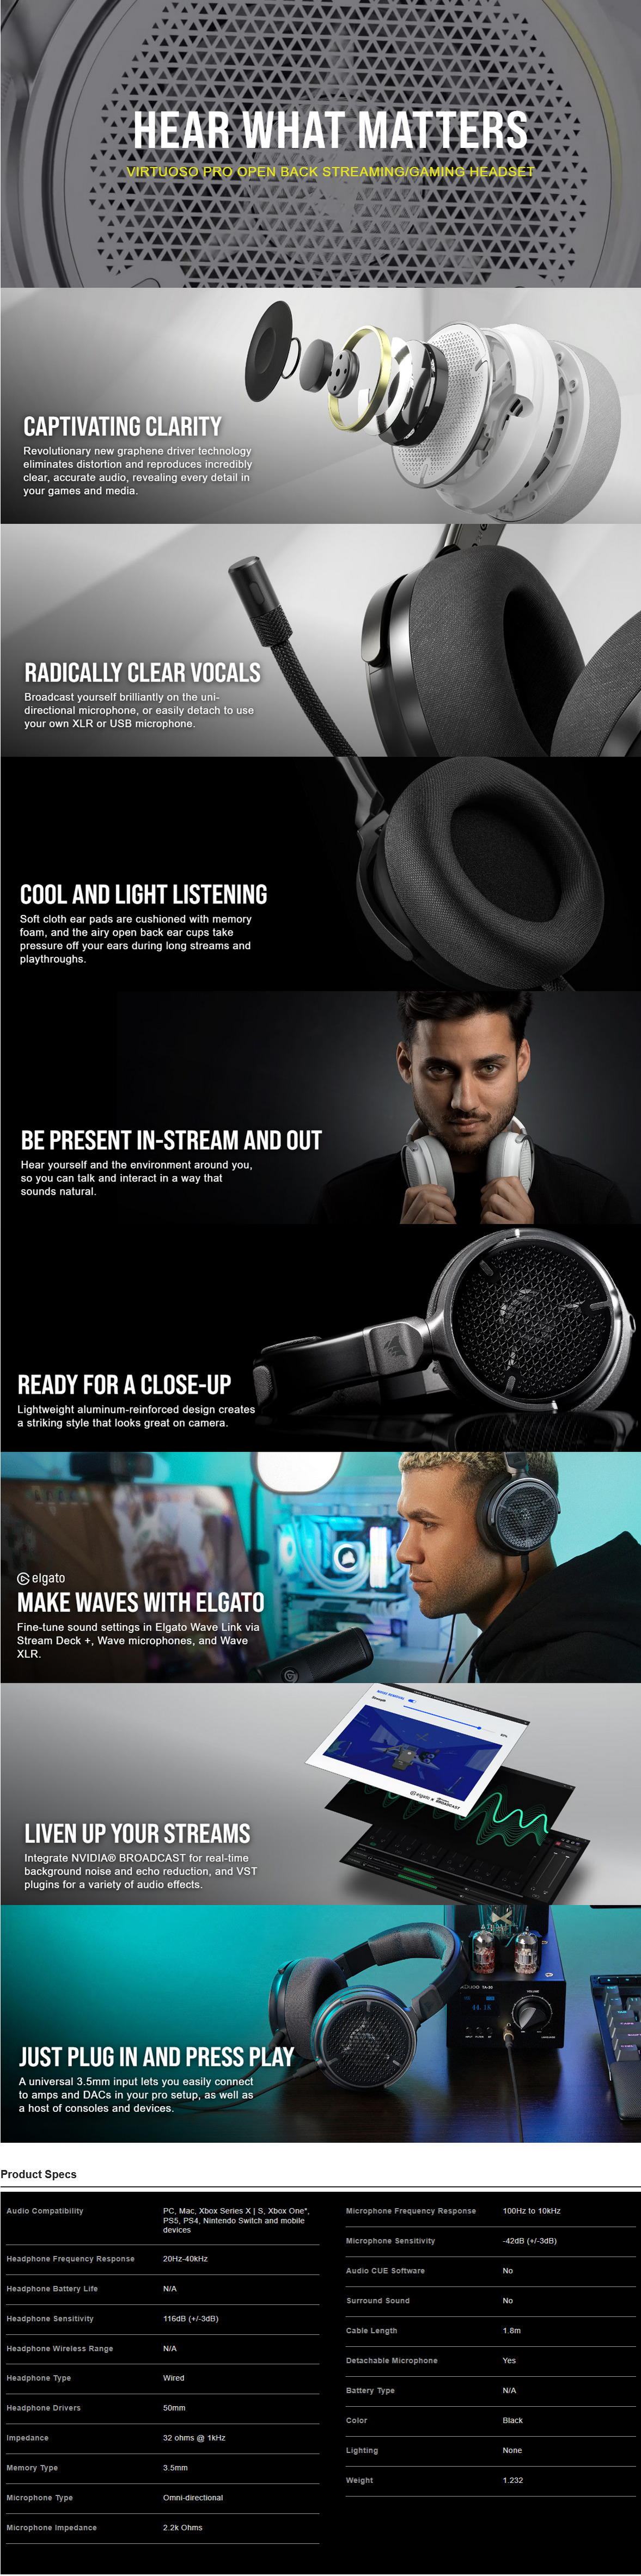 A large marketing image providing additional information about the product Corsair VIRTUOSO PRO Open Back Gaming Headset - Carbon - Additional alt info not provided